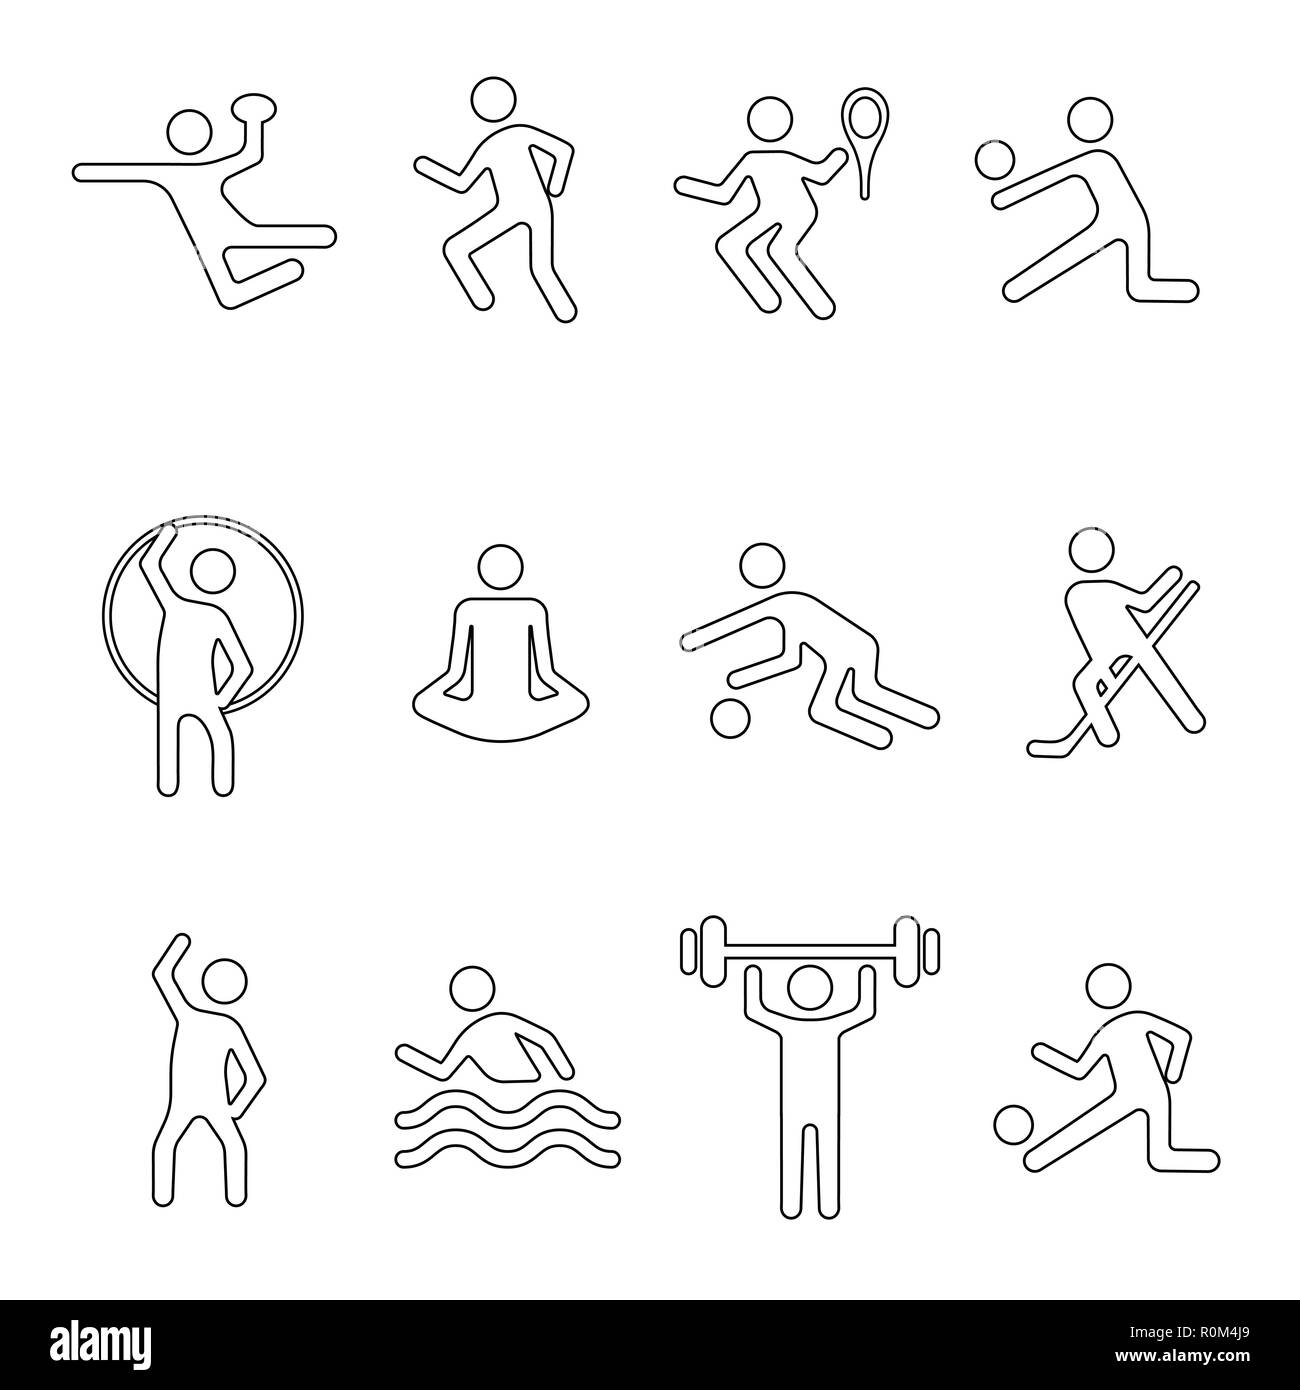 Sport linear icons set, vector silhouette, flat fitness logo, stencil emblem, line shape athlete person. Outline black badges team and singles various Stock Vector